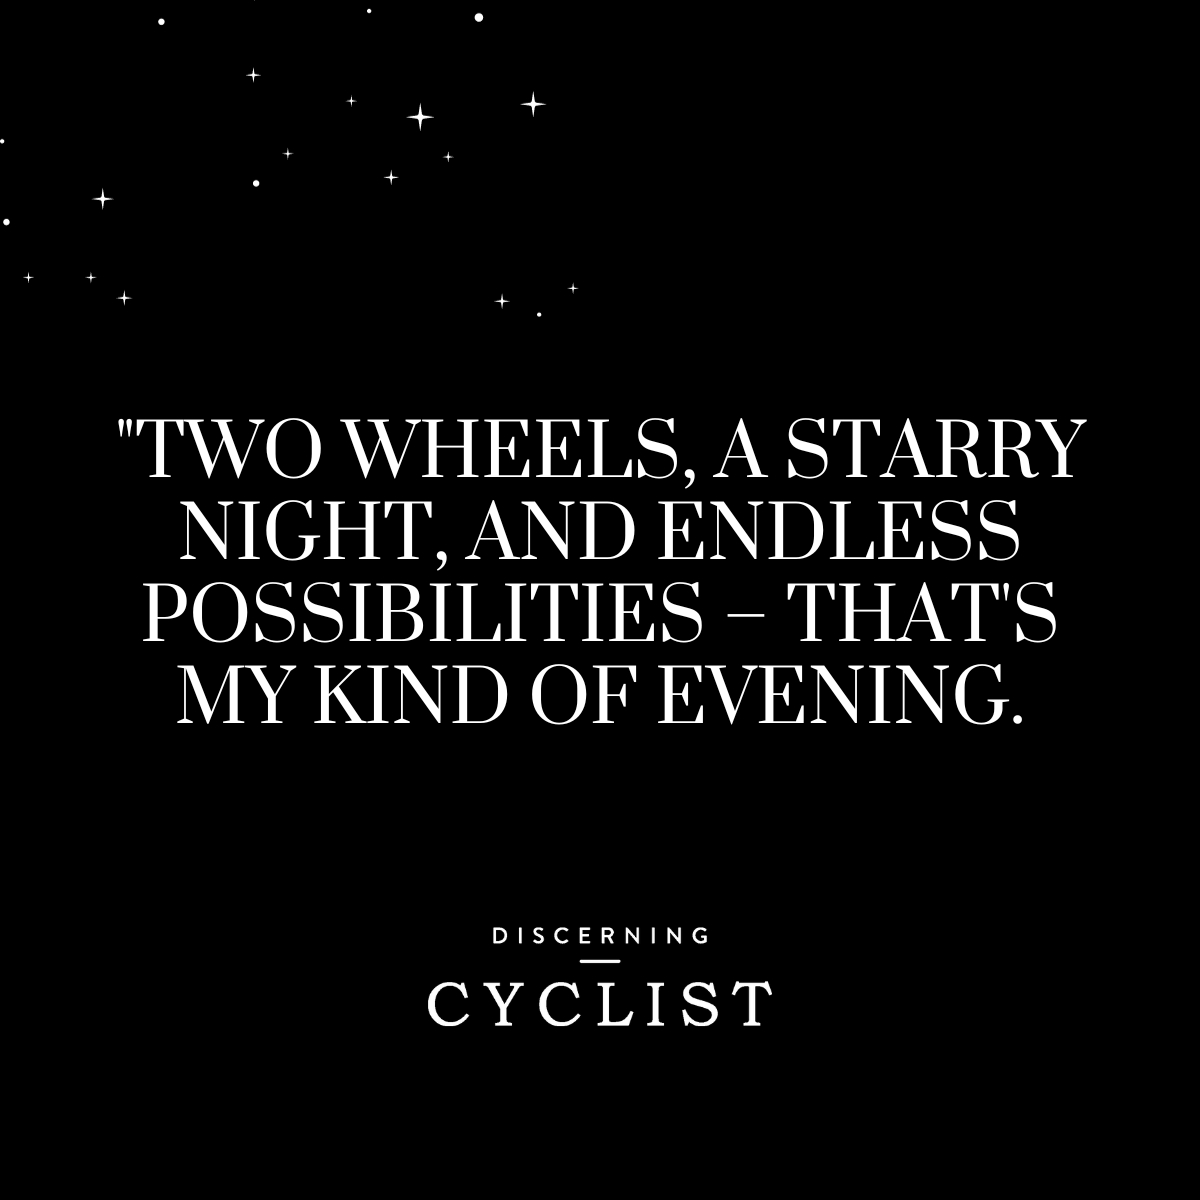 "Two wheels, a starry night, and endless possibilities – that